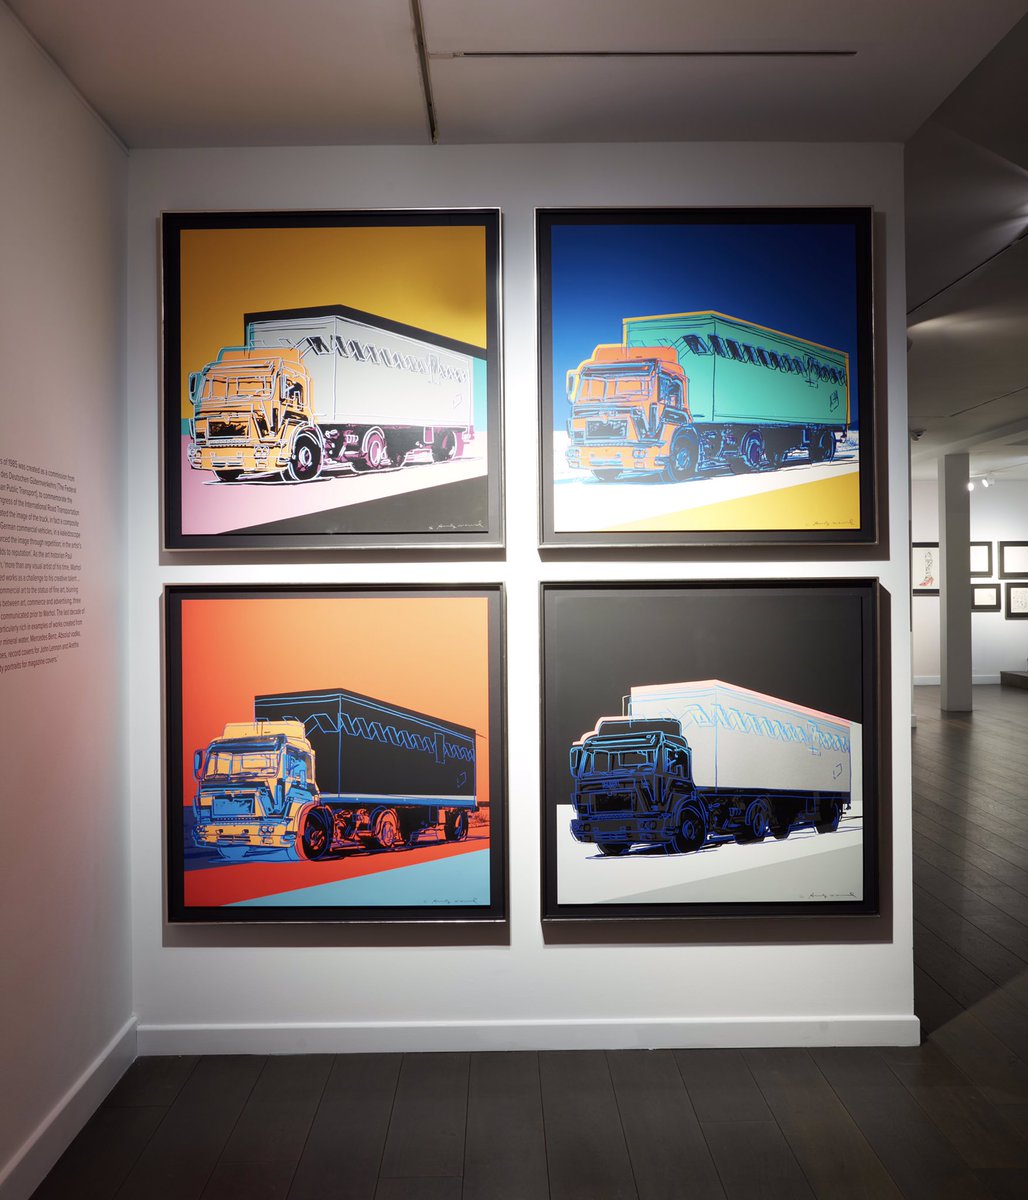 #WarholUnseen 🚚 Warhol’s Truck series of 1985 was created as a commission from The Federal Association of German Public Transport to commemorate the Twentieth World Congress of the International Road Transportation Union. On view now💥 #andywarhol #exhibition #popart